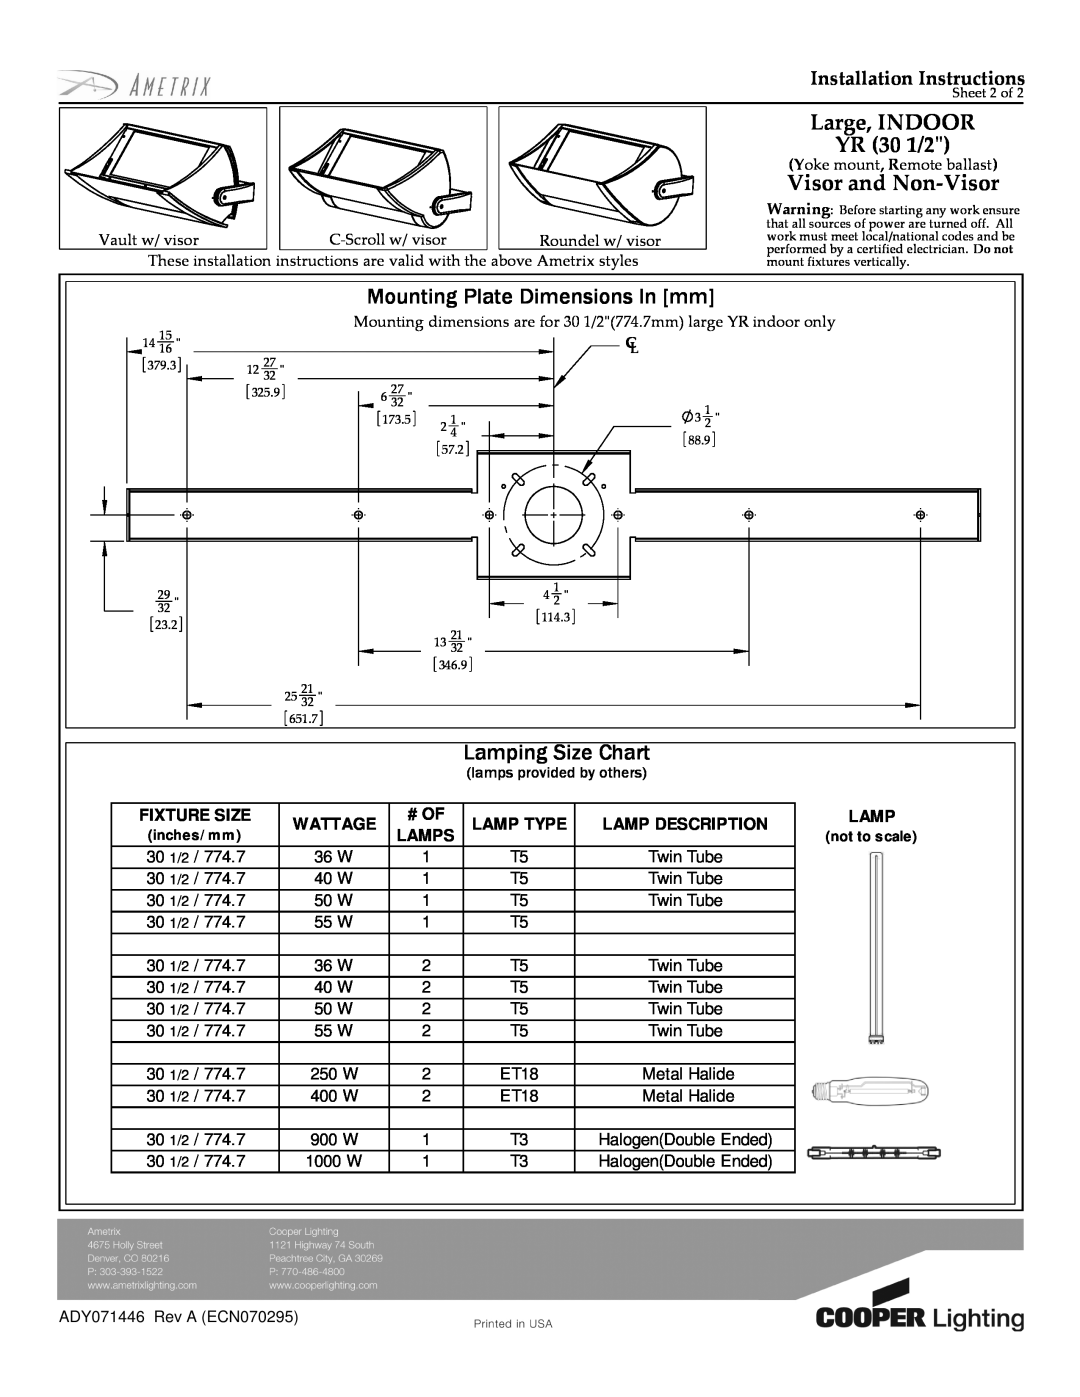 Cooper Lighting Large, INDOOR YR 30 1/2, Visor and Non-Visor, Mounting Plate Dimensions In mm, Lamping Size Chart, # Of 